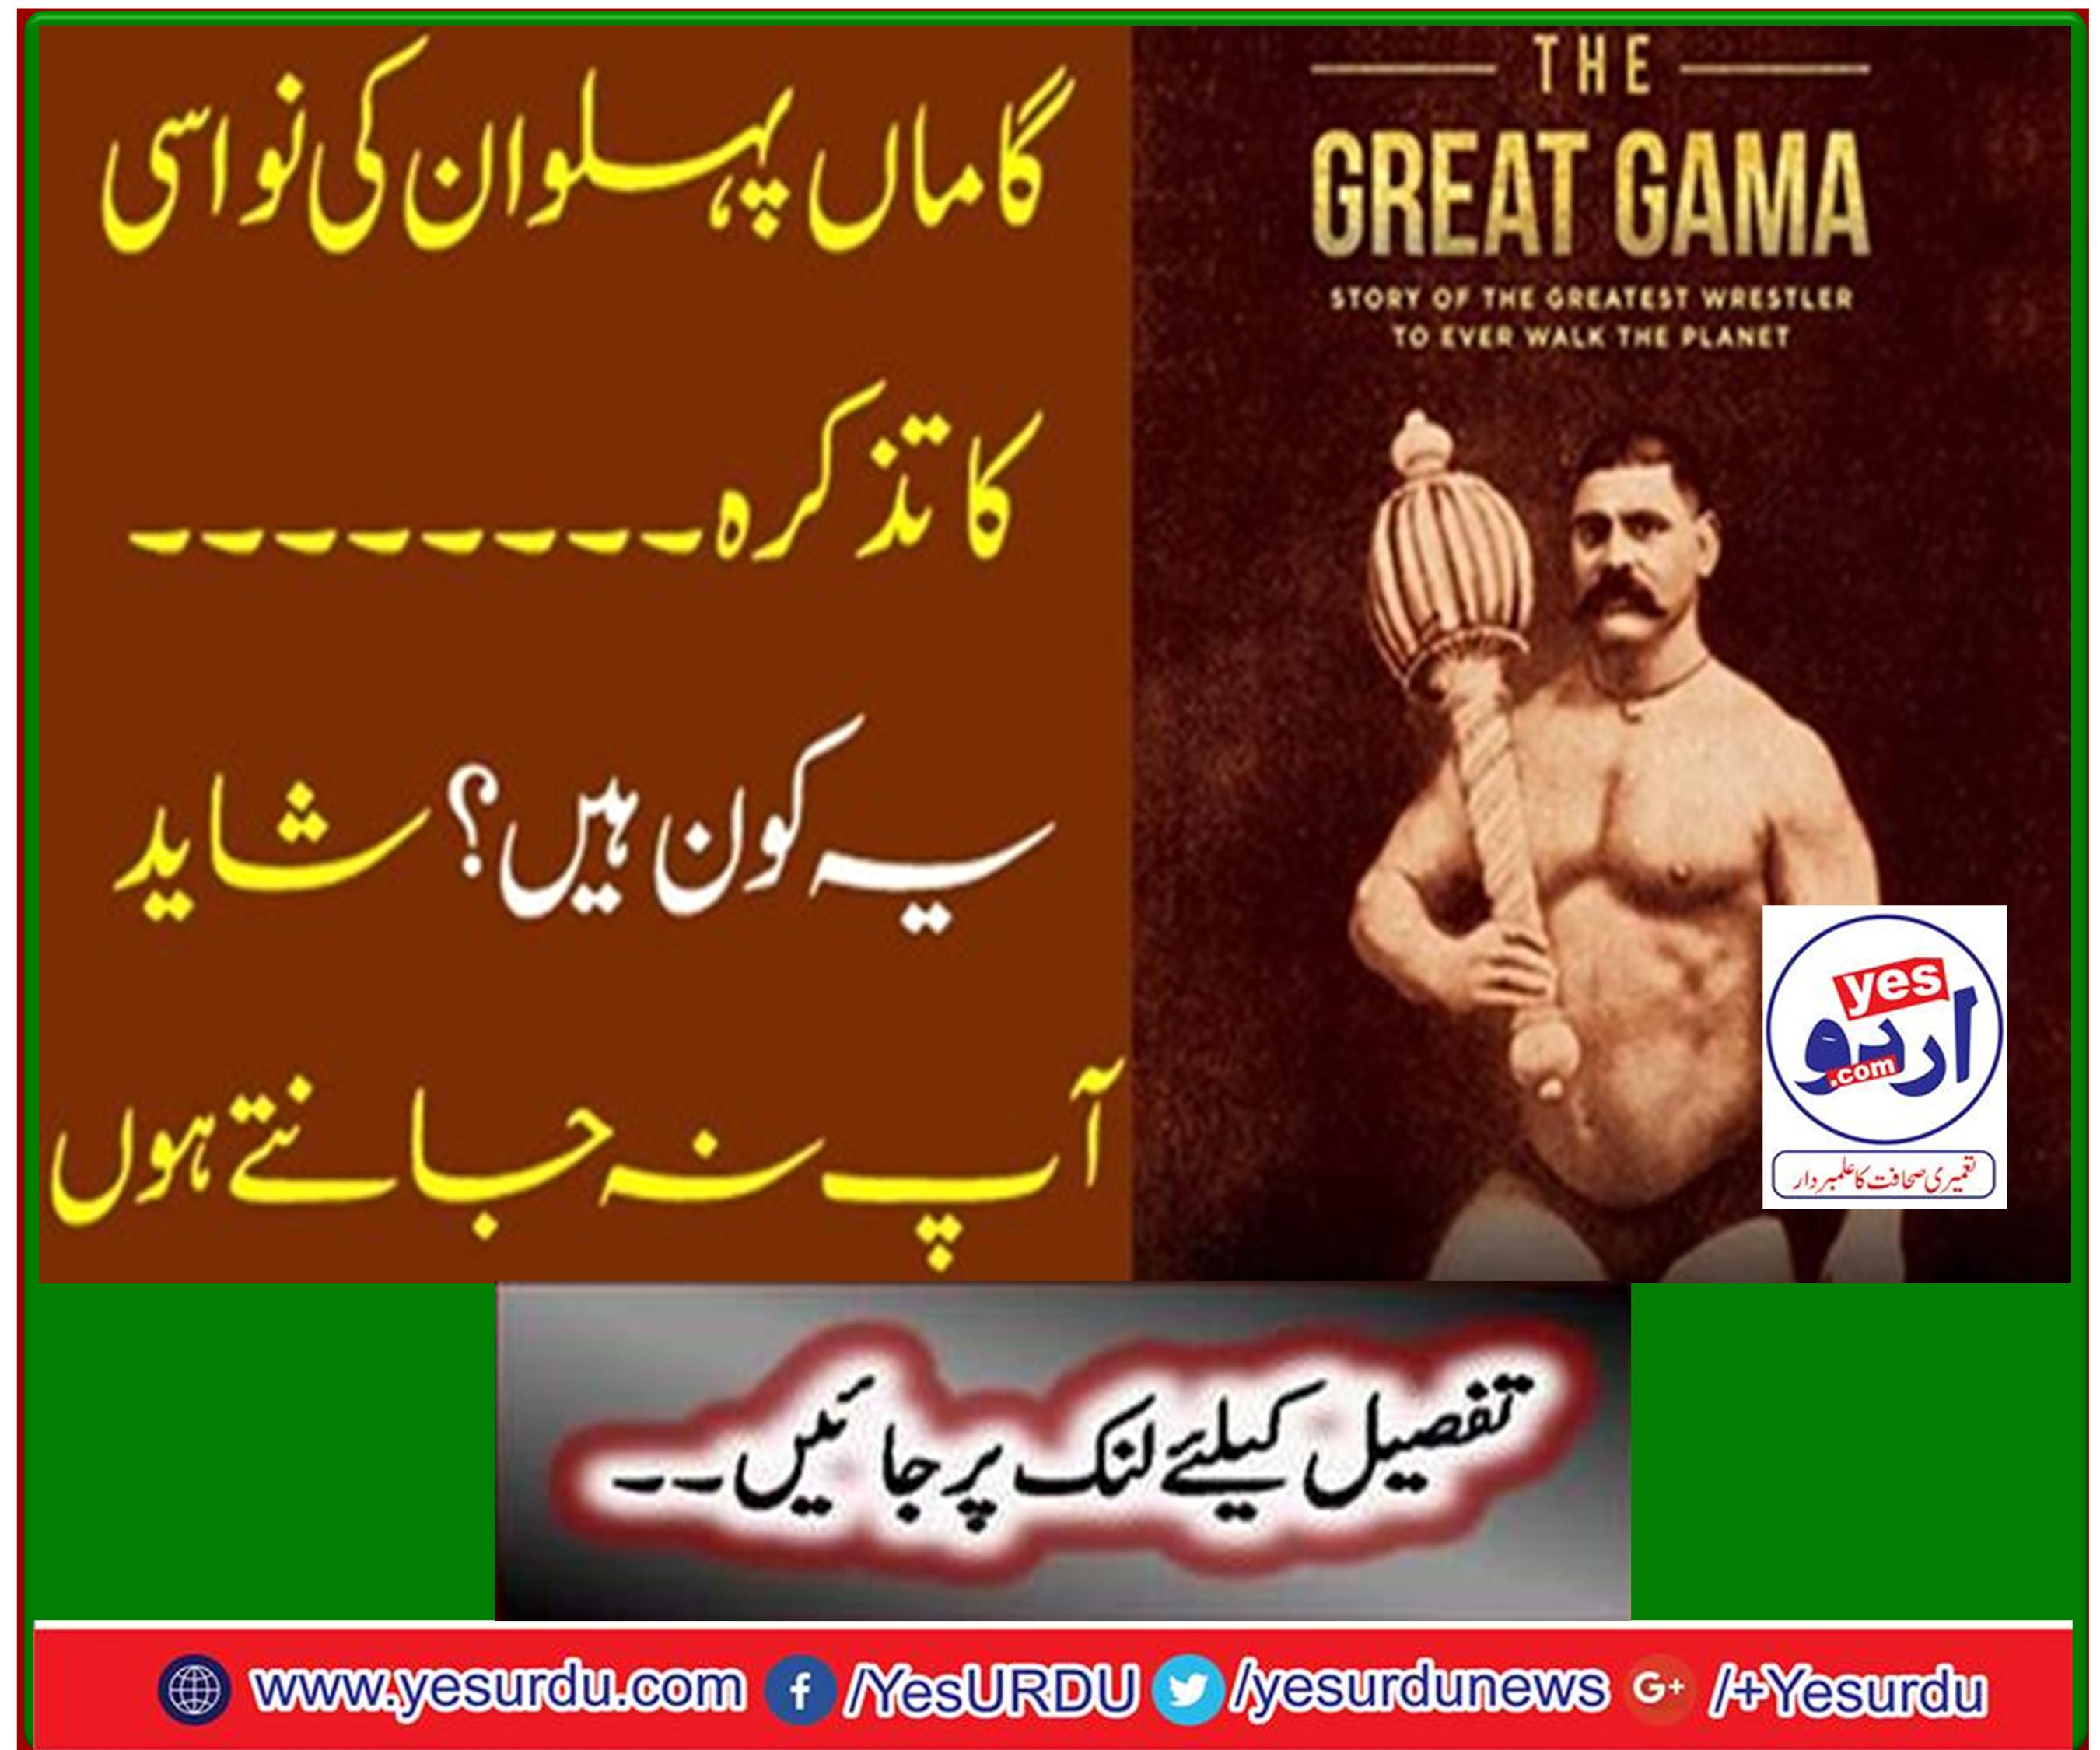 Mention of Gamahan Wrestler's Novel ... who is this ? Maybe you don't know